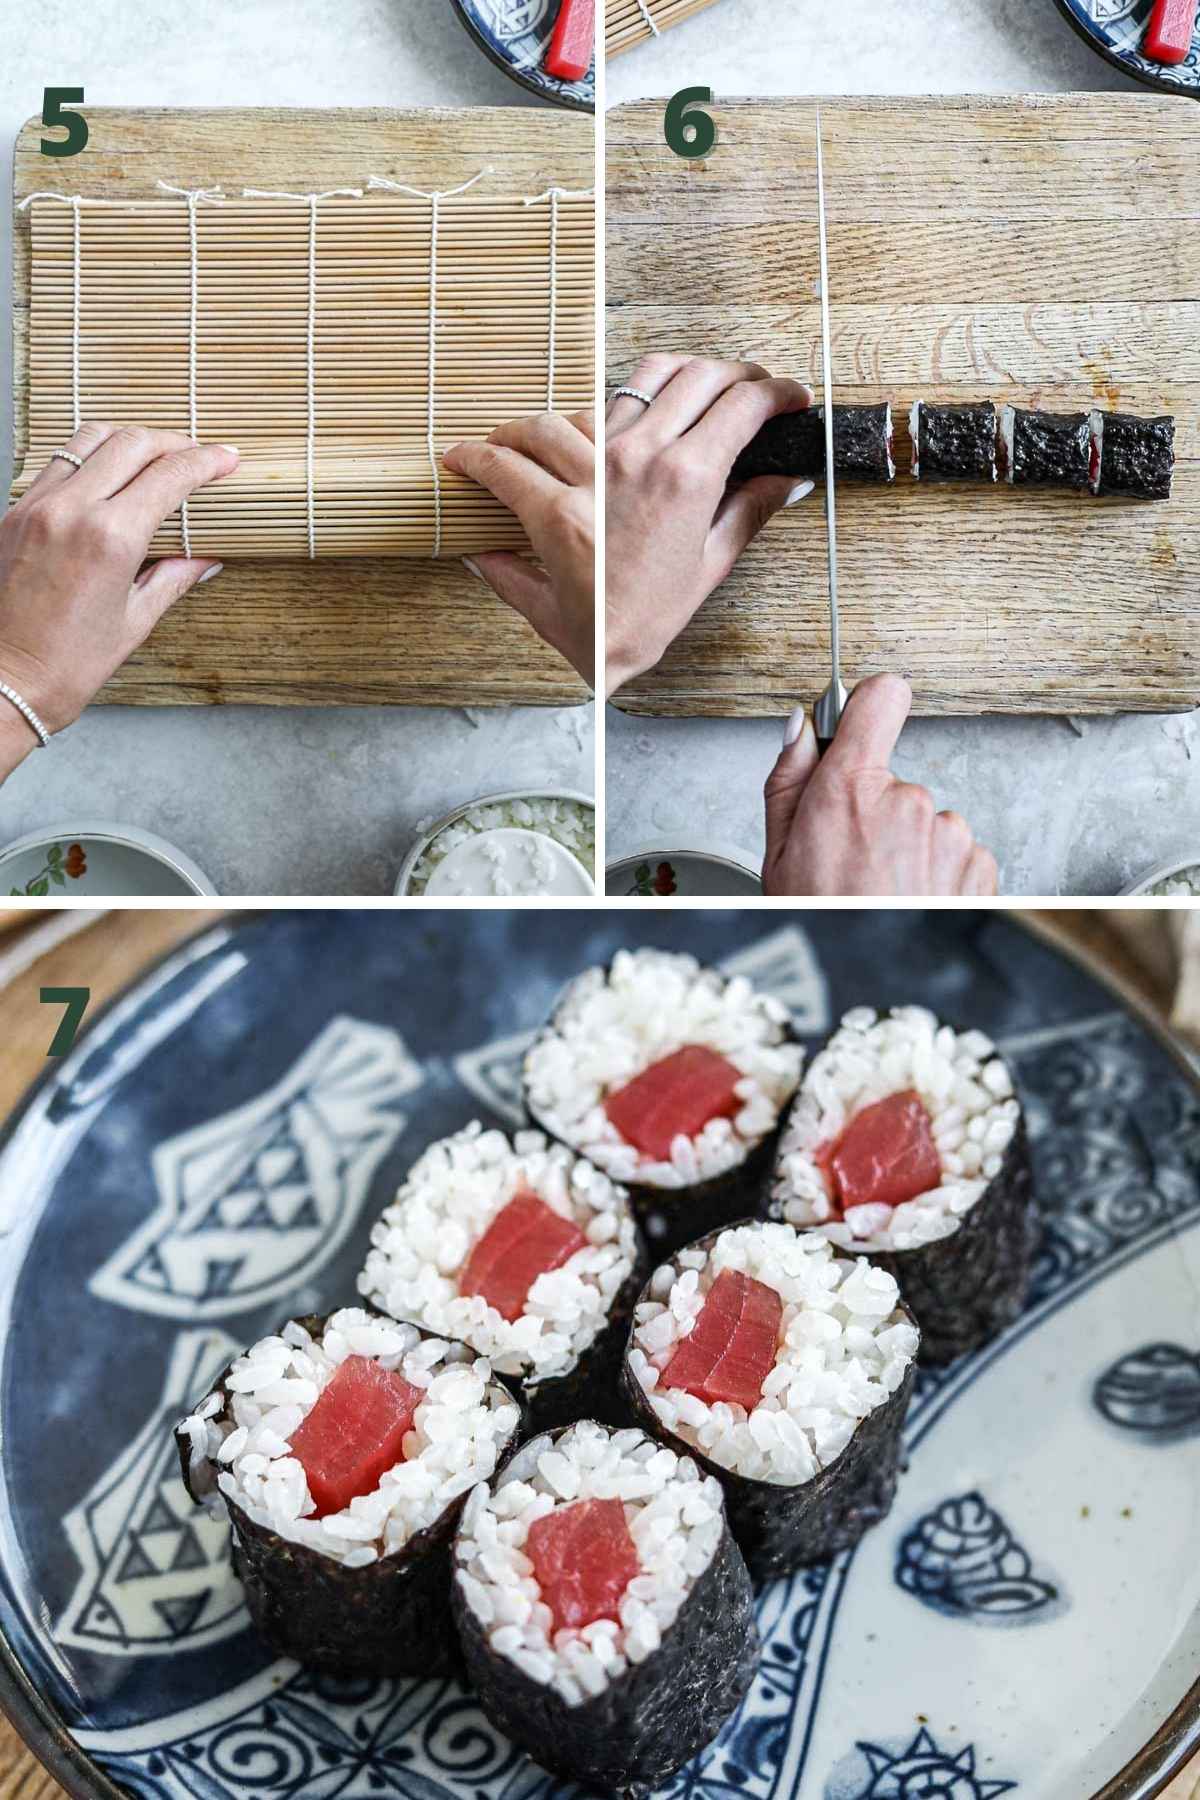 Steps to make tekka maki, including shaping the sushi roll, slicing the roll, and serving.